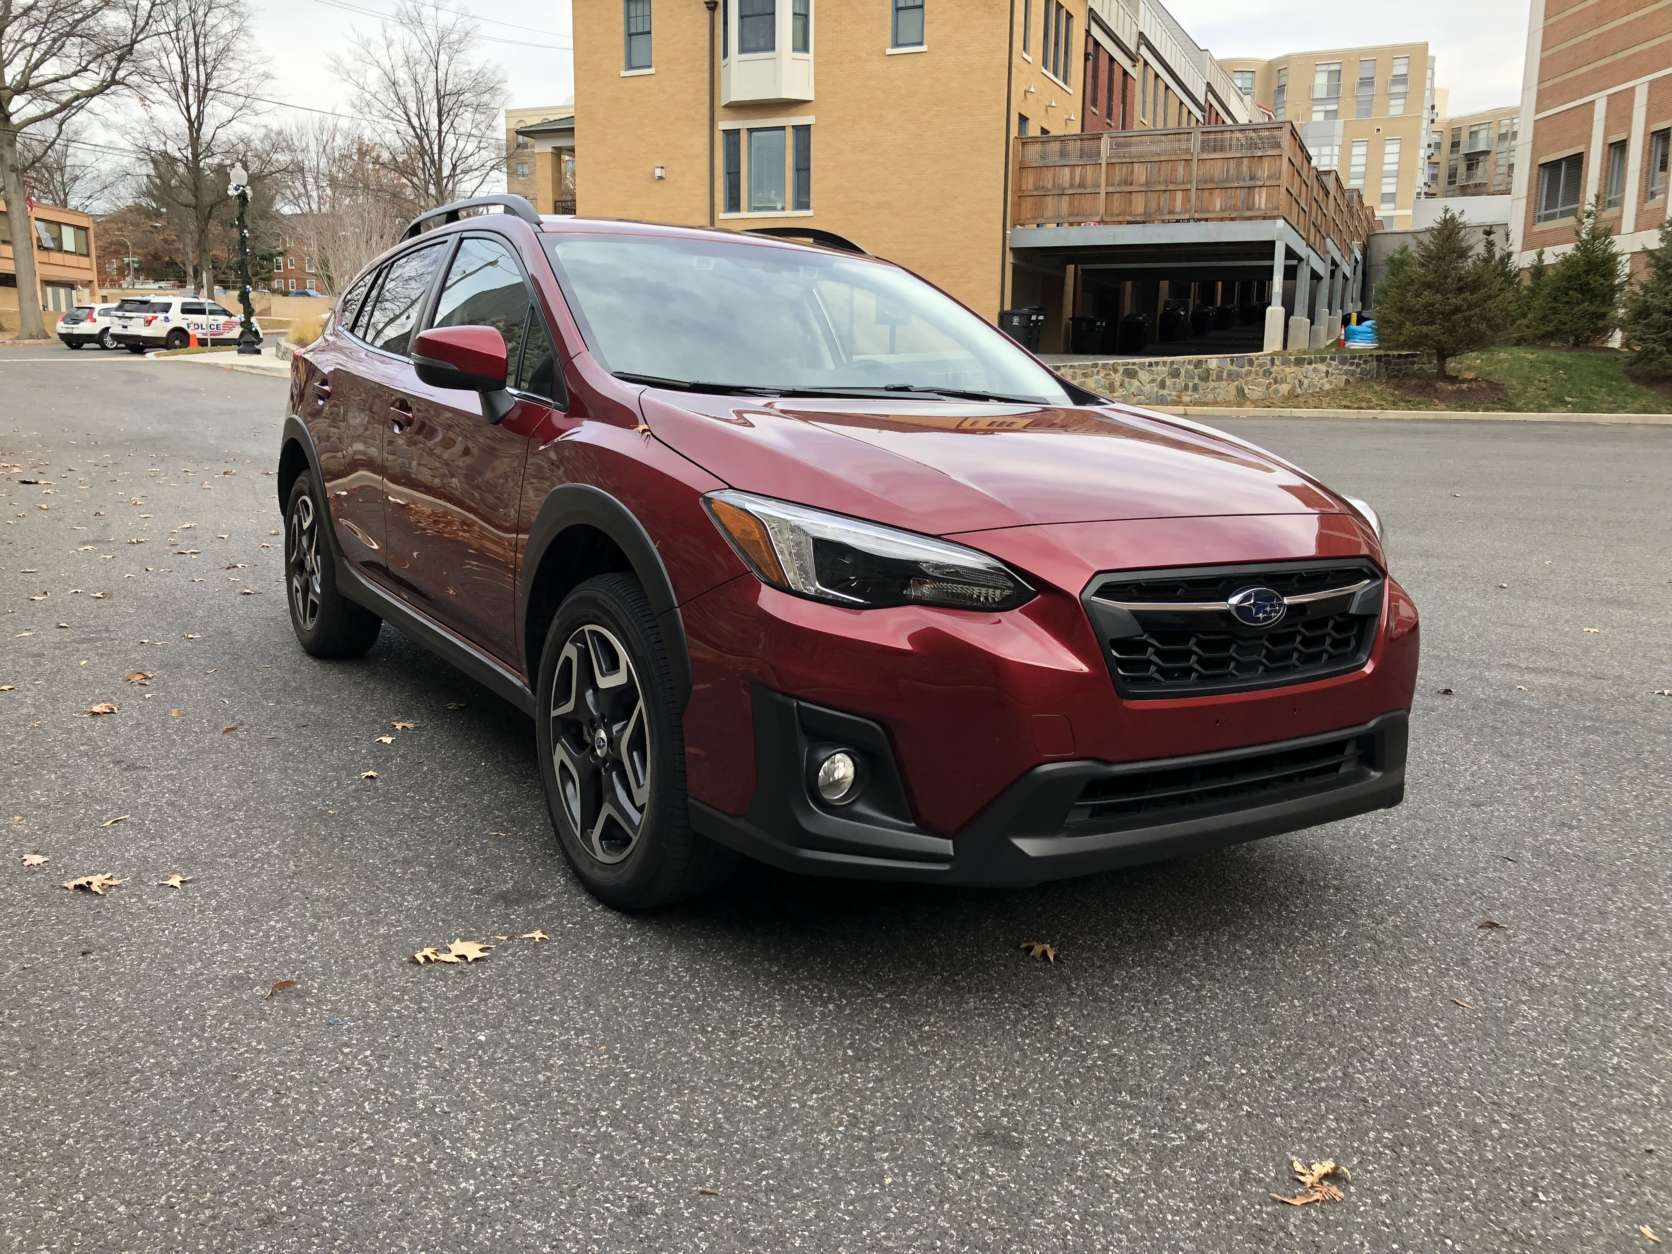 WTOP's car guy Mike Parris said Subaru has improved on its useful wagon, making it a more fun-to-drive ride with a new high-quality interior and many new safety features. (WTOP/Mike Parris) 